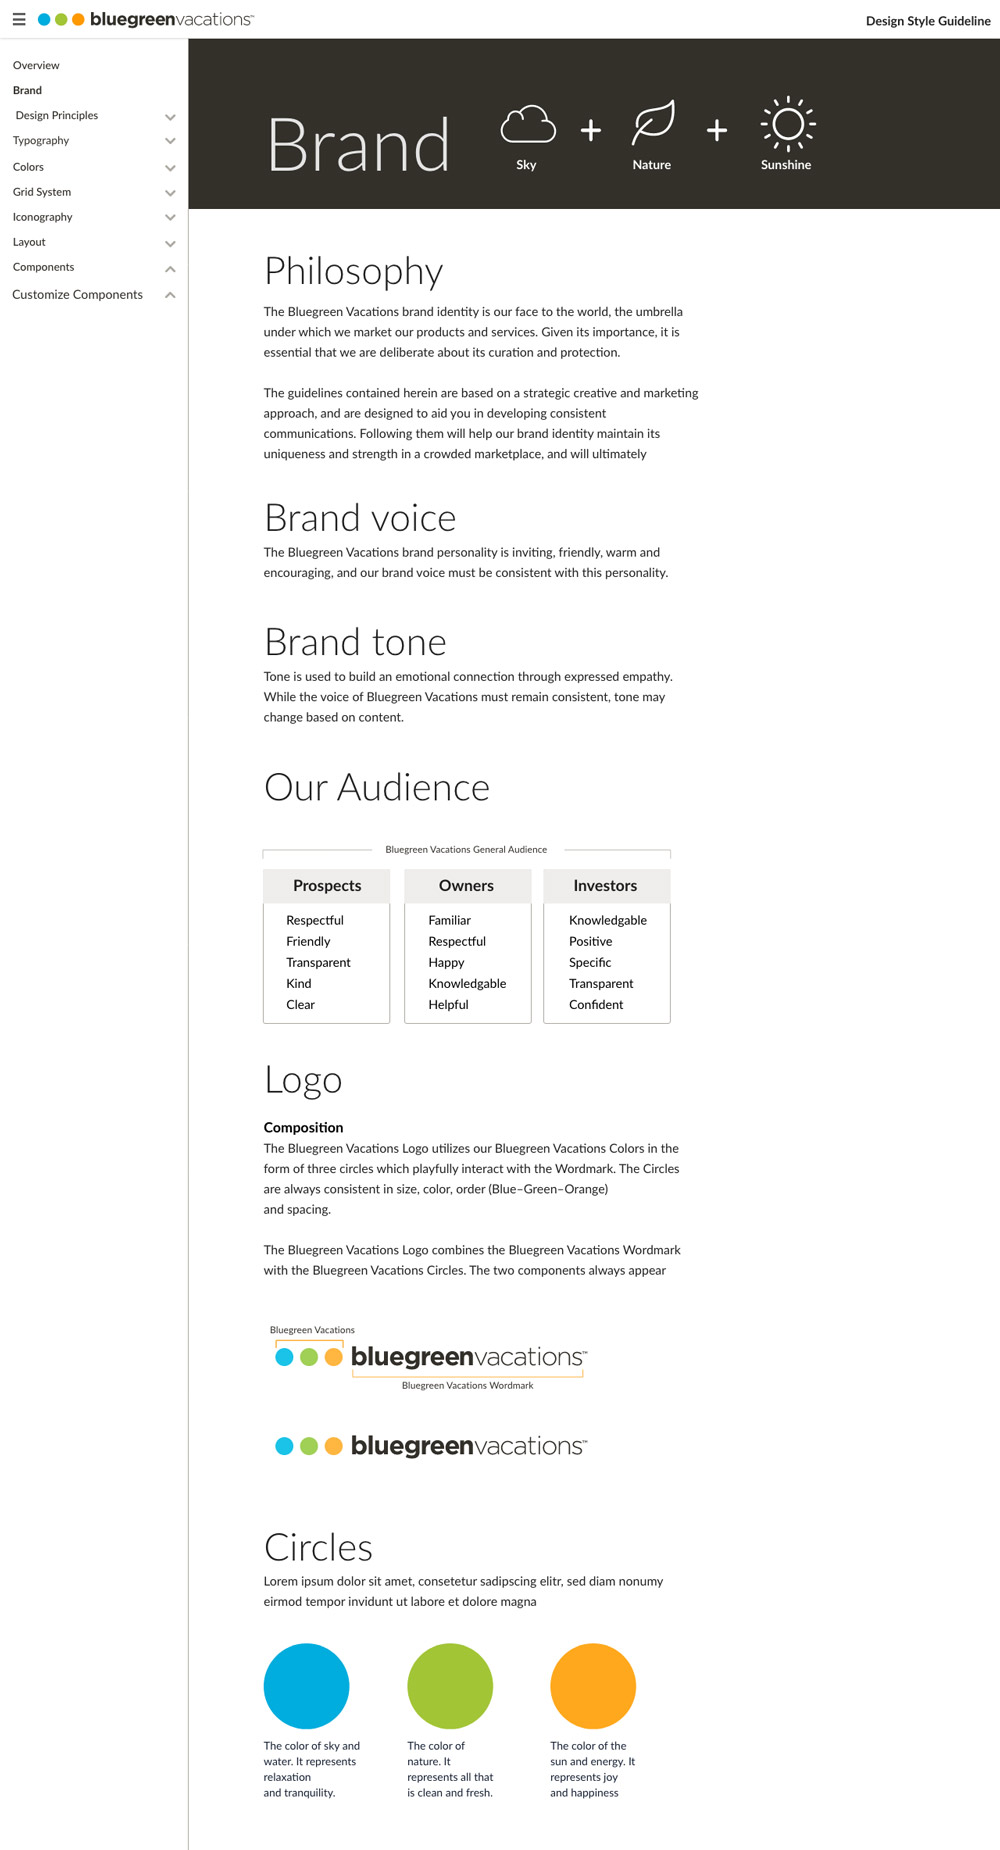 Brand overview